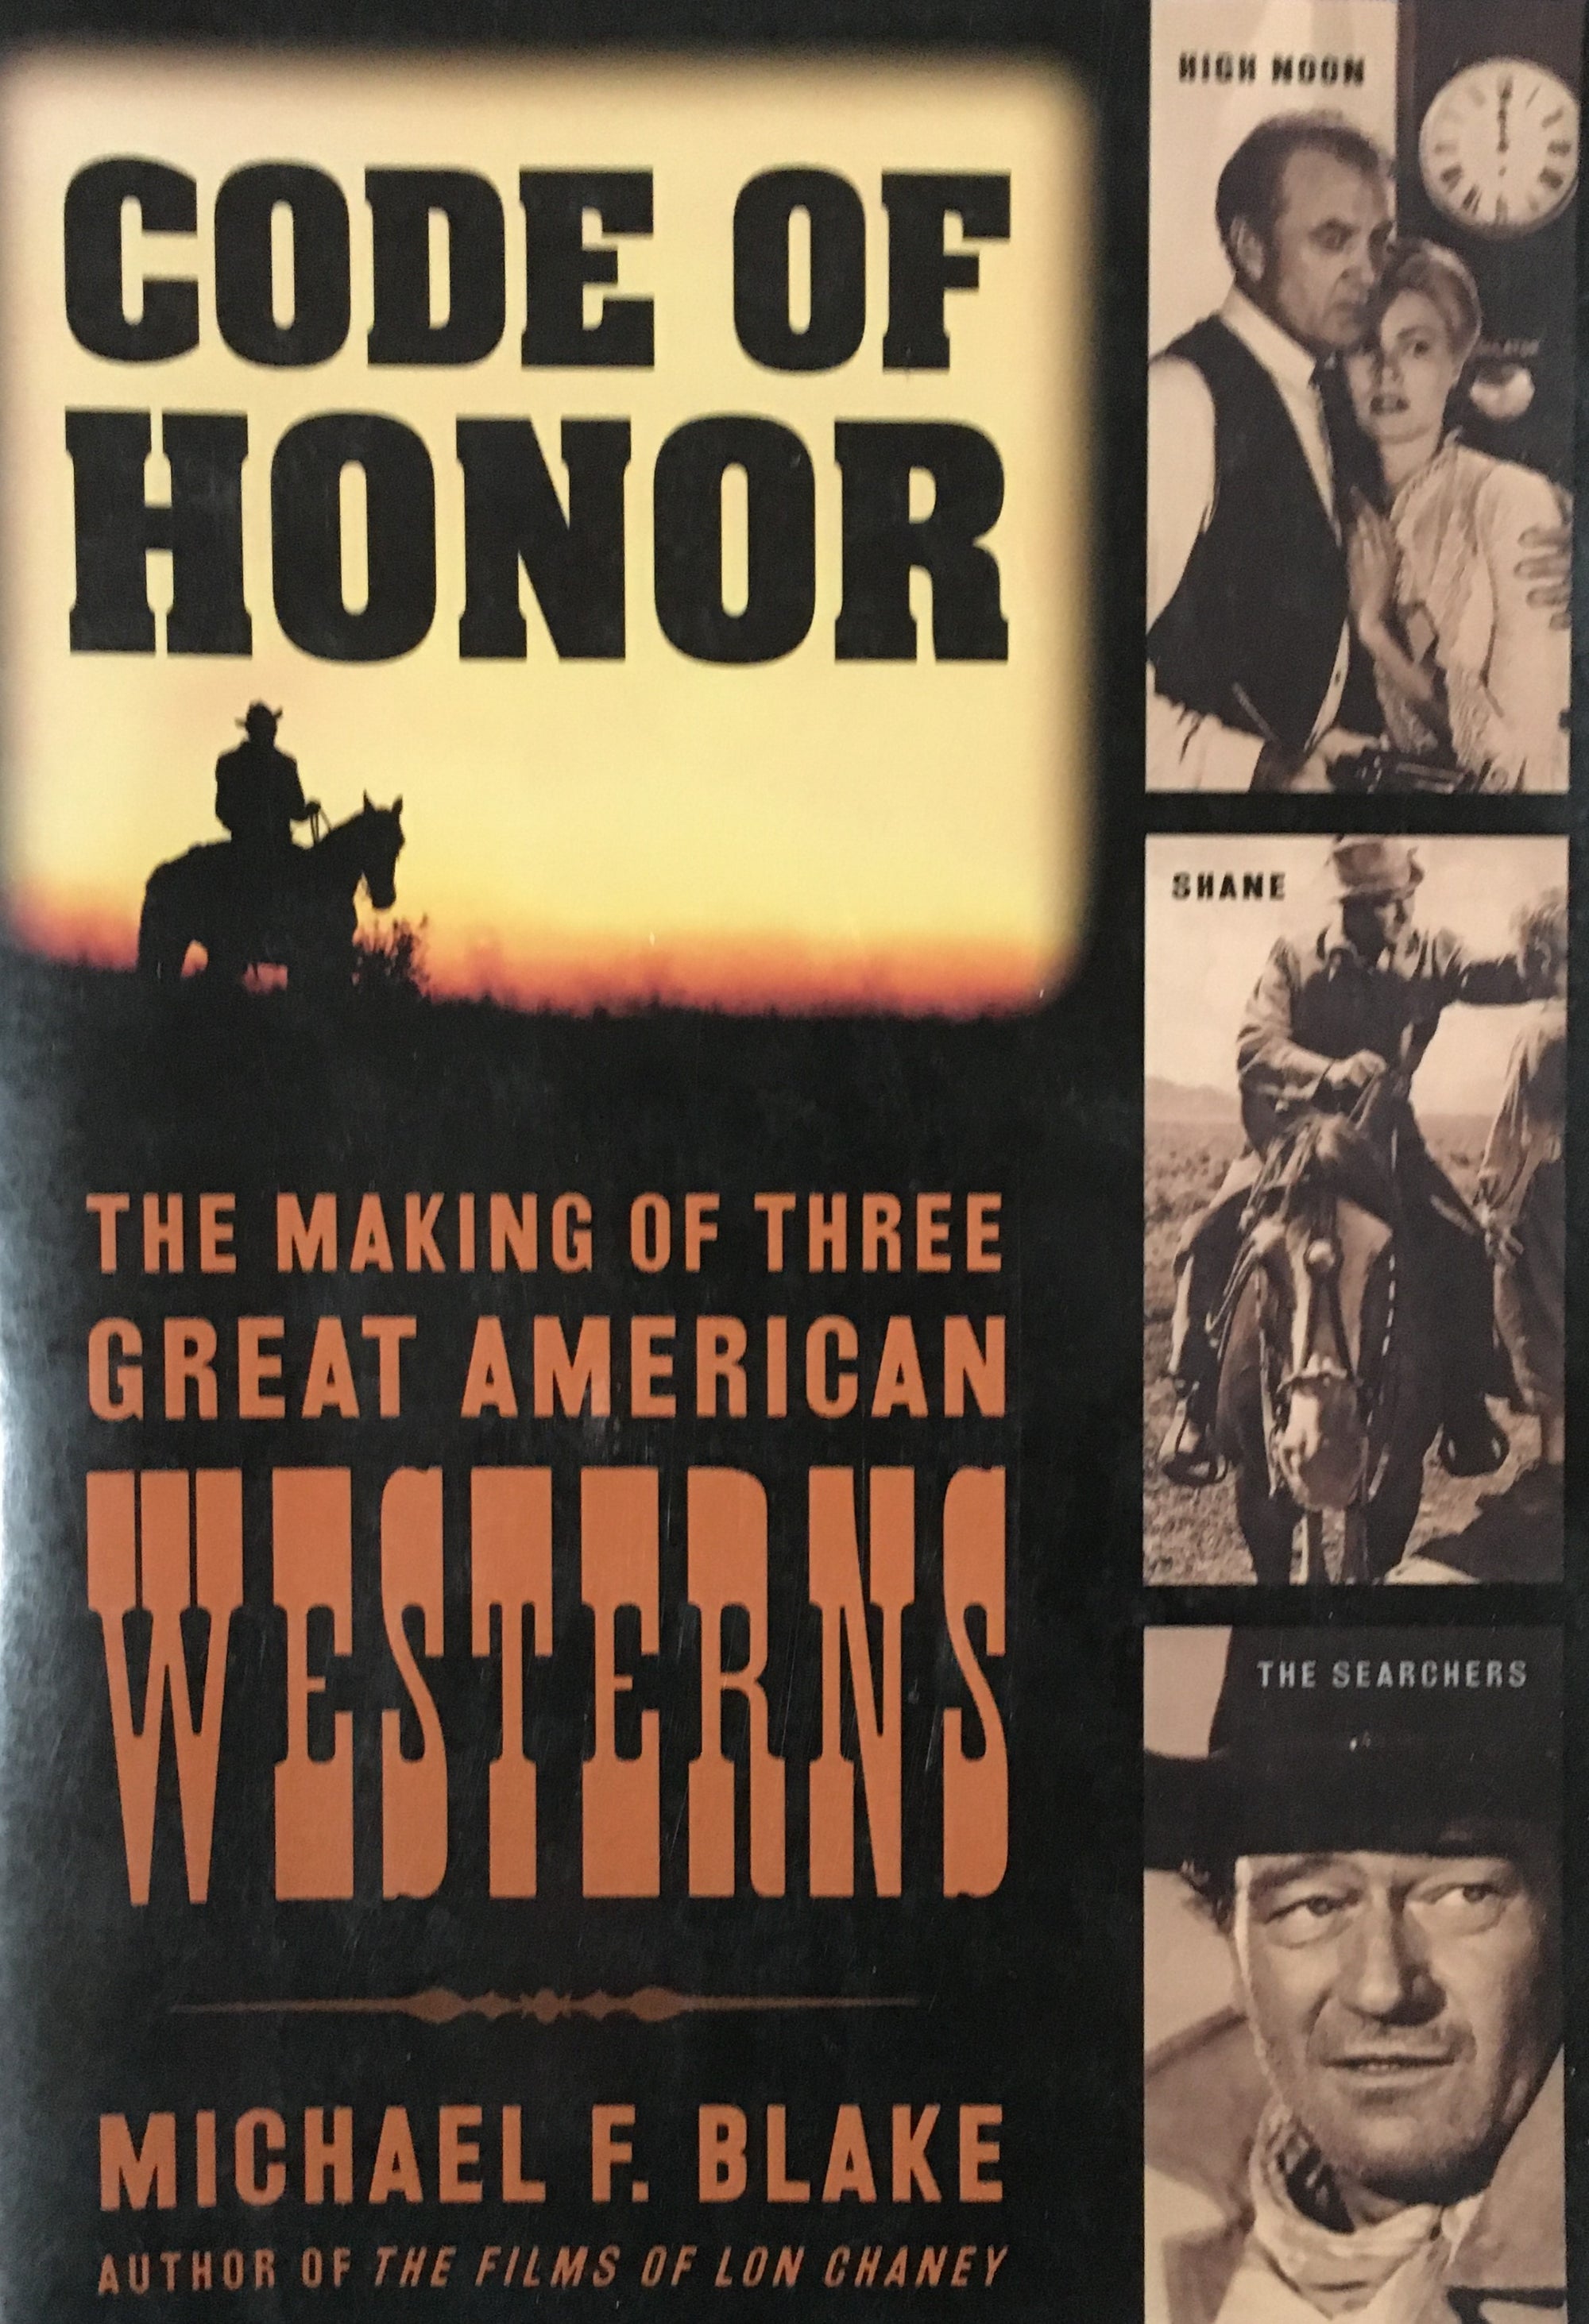 Code of Honor The Making of Three Great American Westerns by Michael F. Blake Book Cover